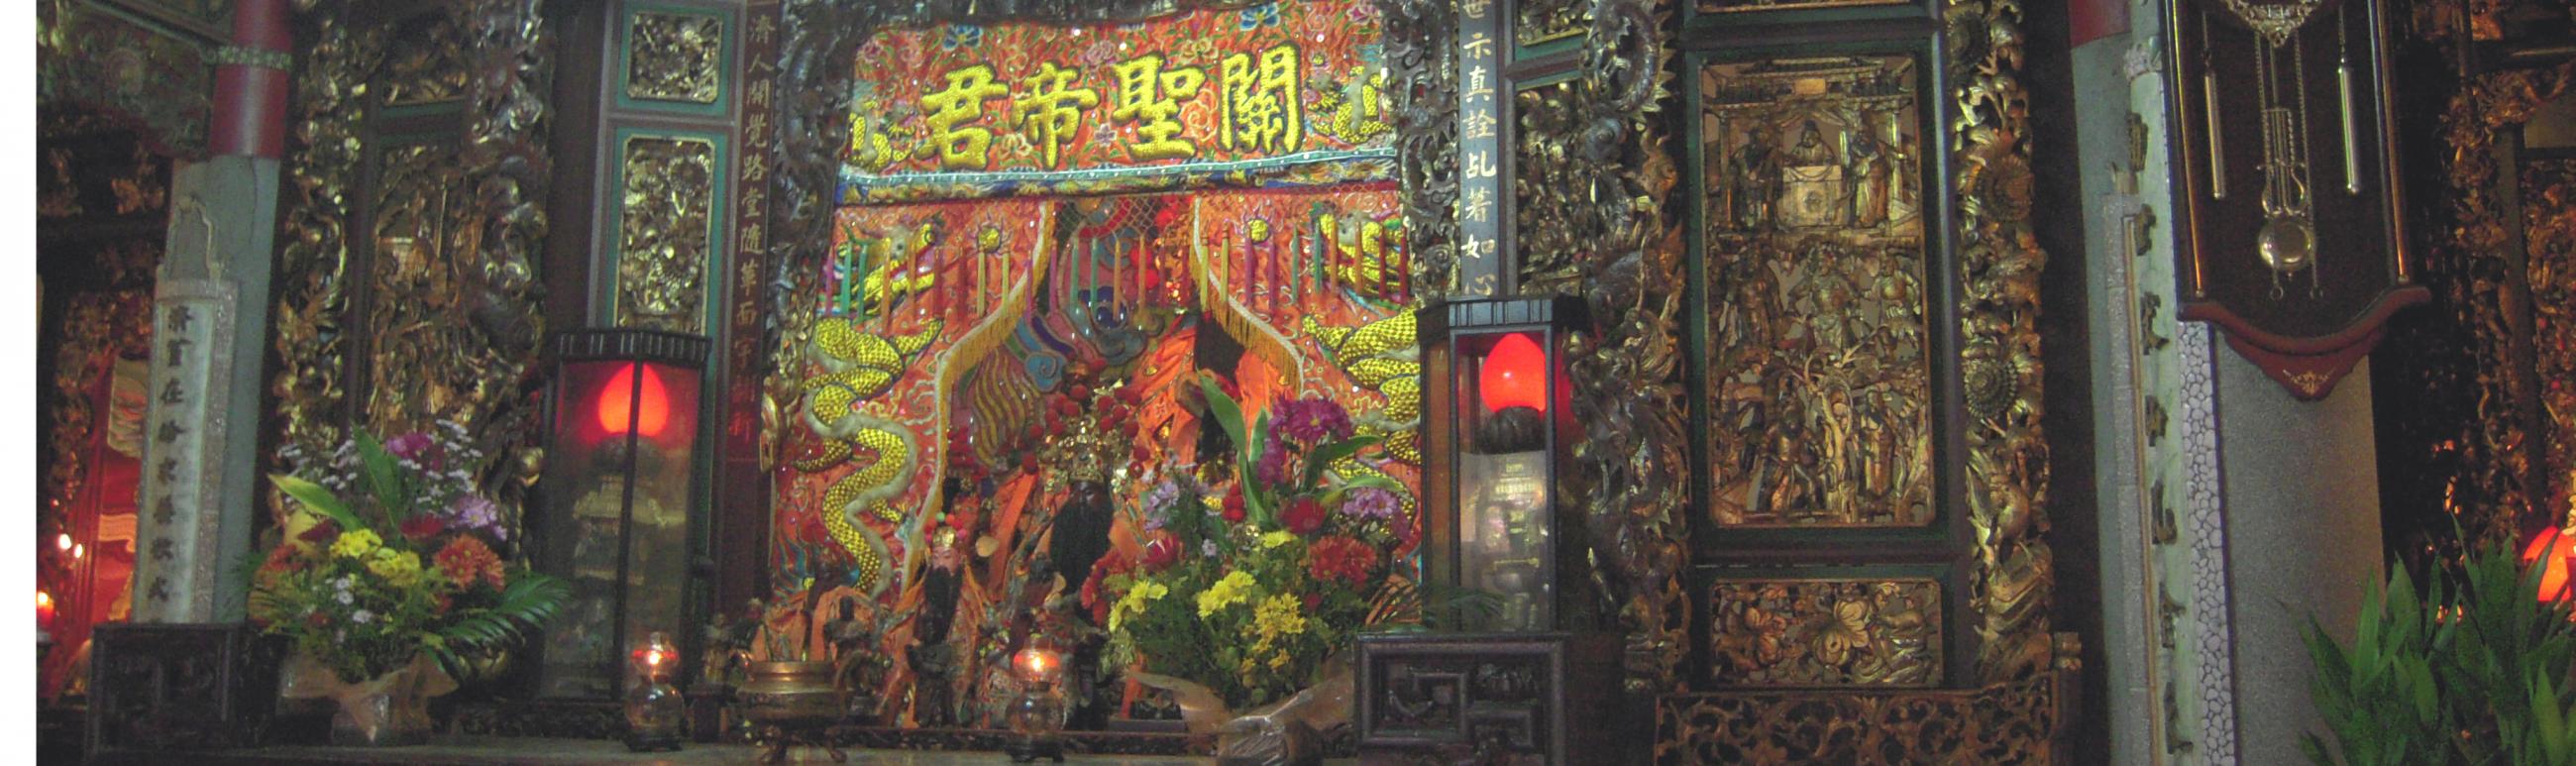 taiwanese temple